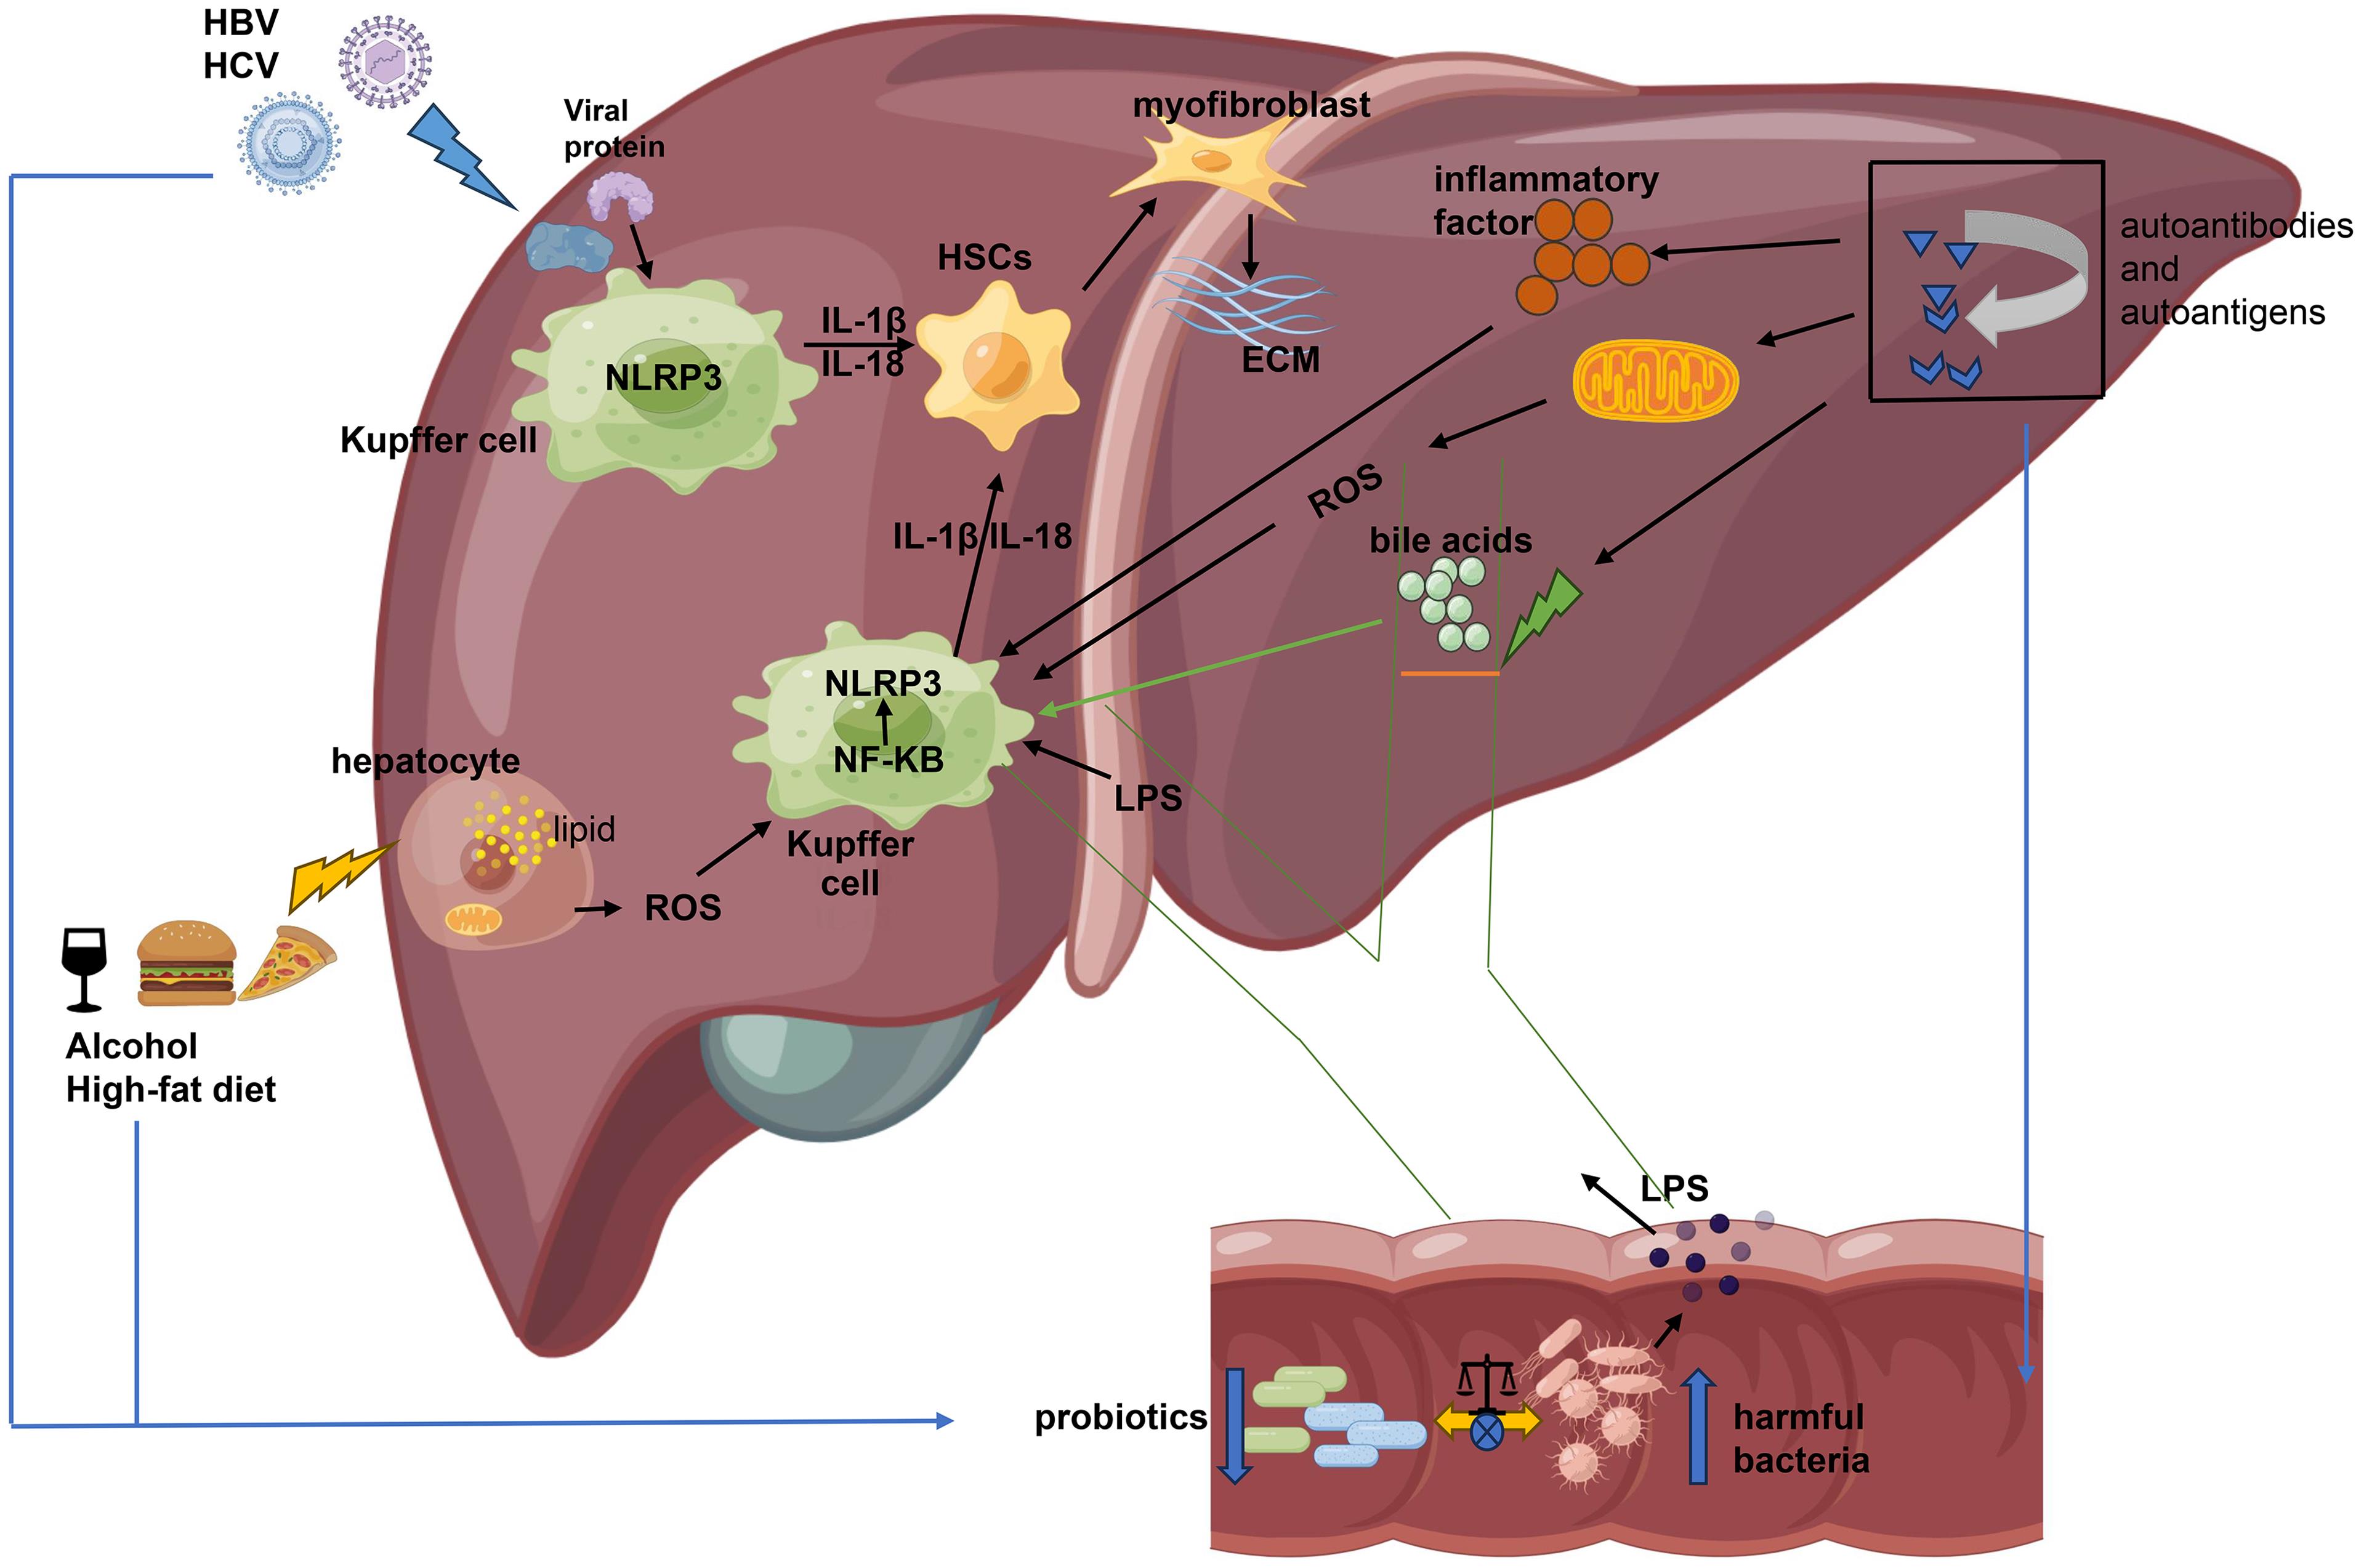 Activation of NLRP3 inflammasome in chronic liver disease.